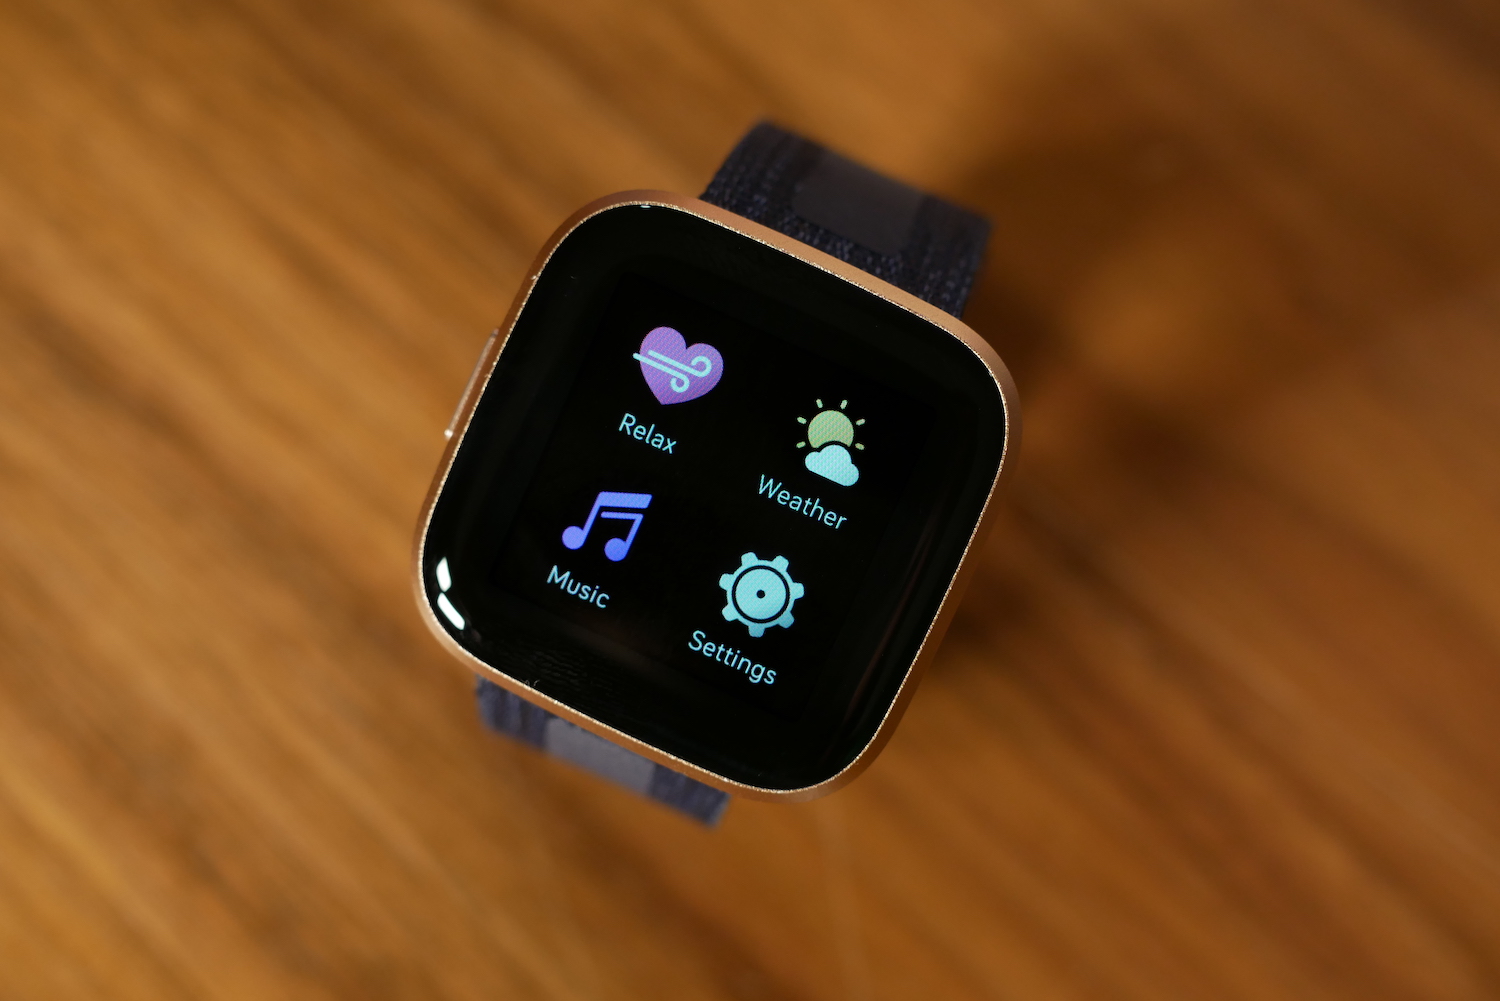 Fitbit Versa 2 review: Health focused smartwatch impresses - Wareable